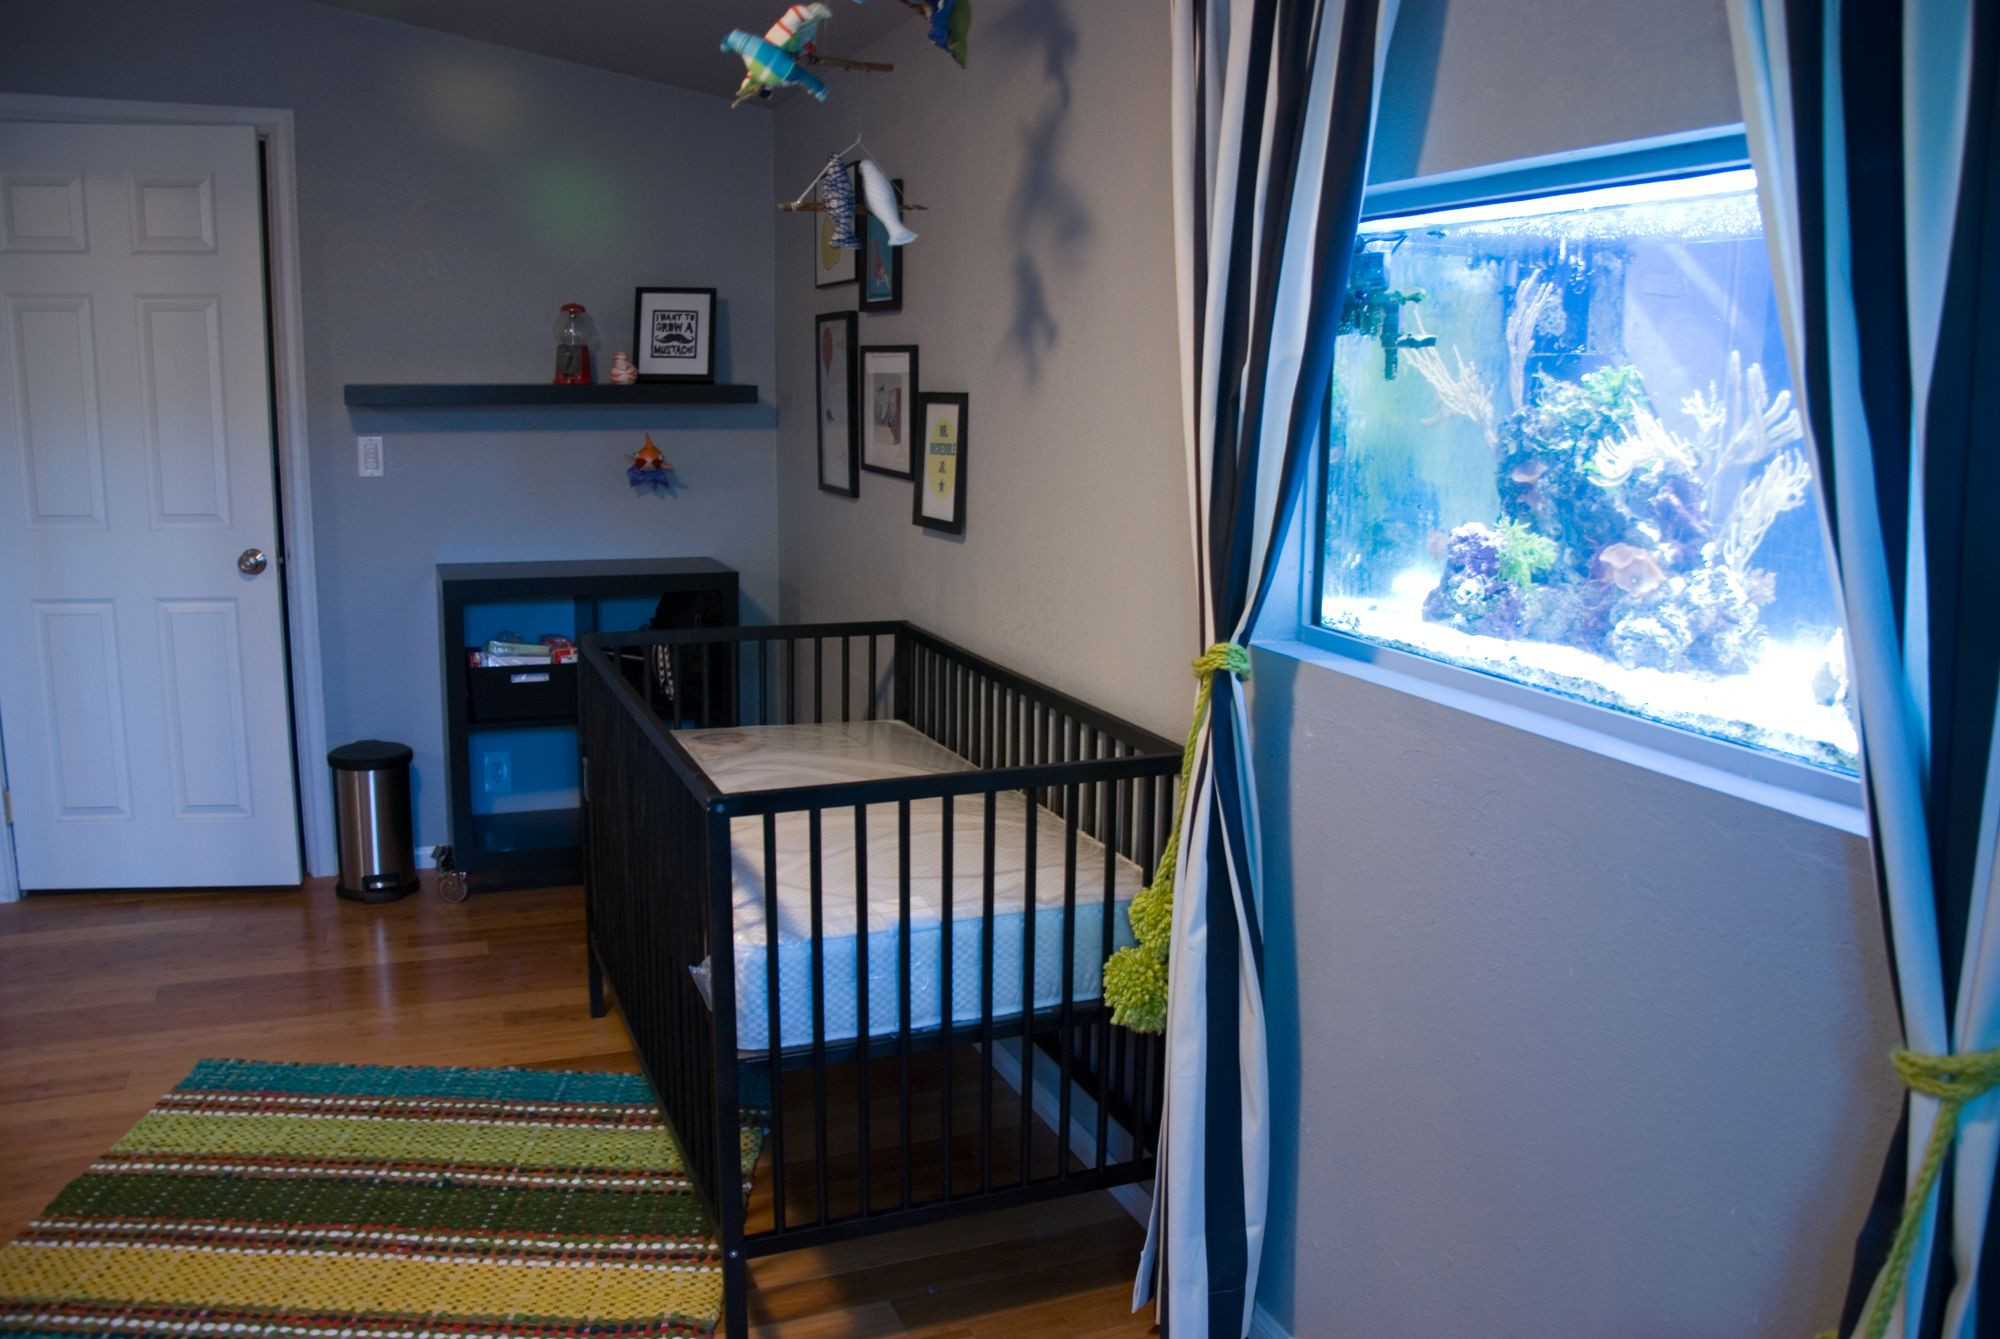 Fish Tanks For Kids Rooms
 I want a fish tank in the nursery Tranquil and a